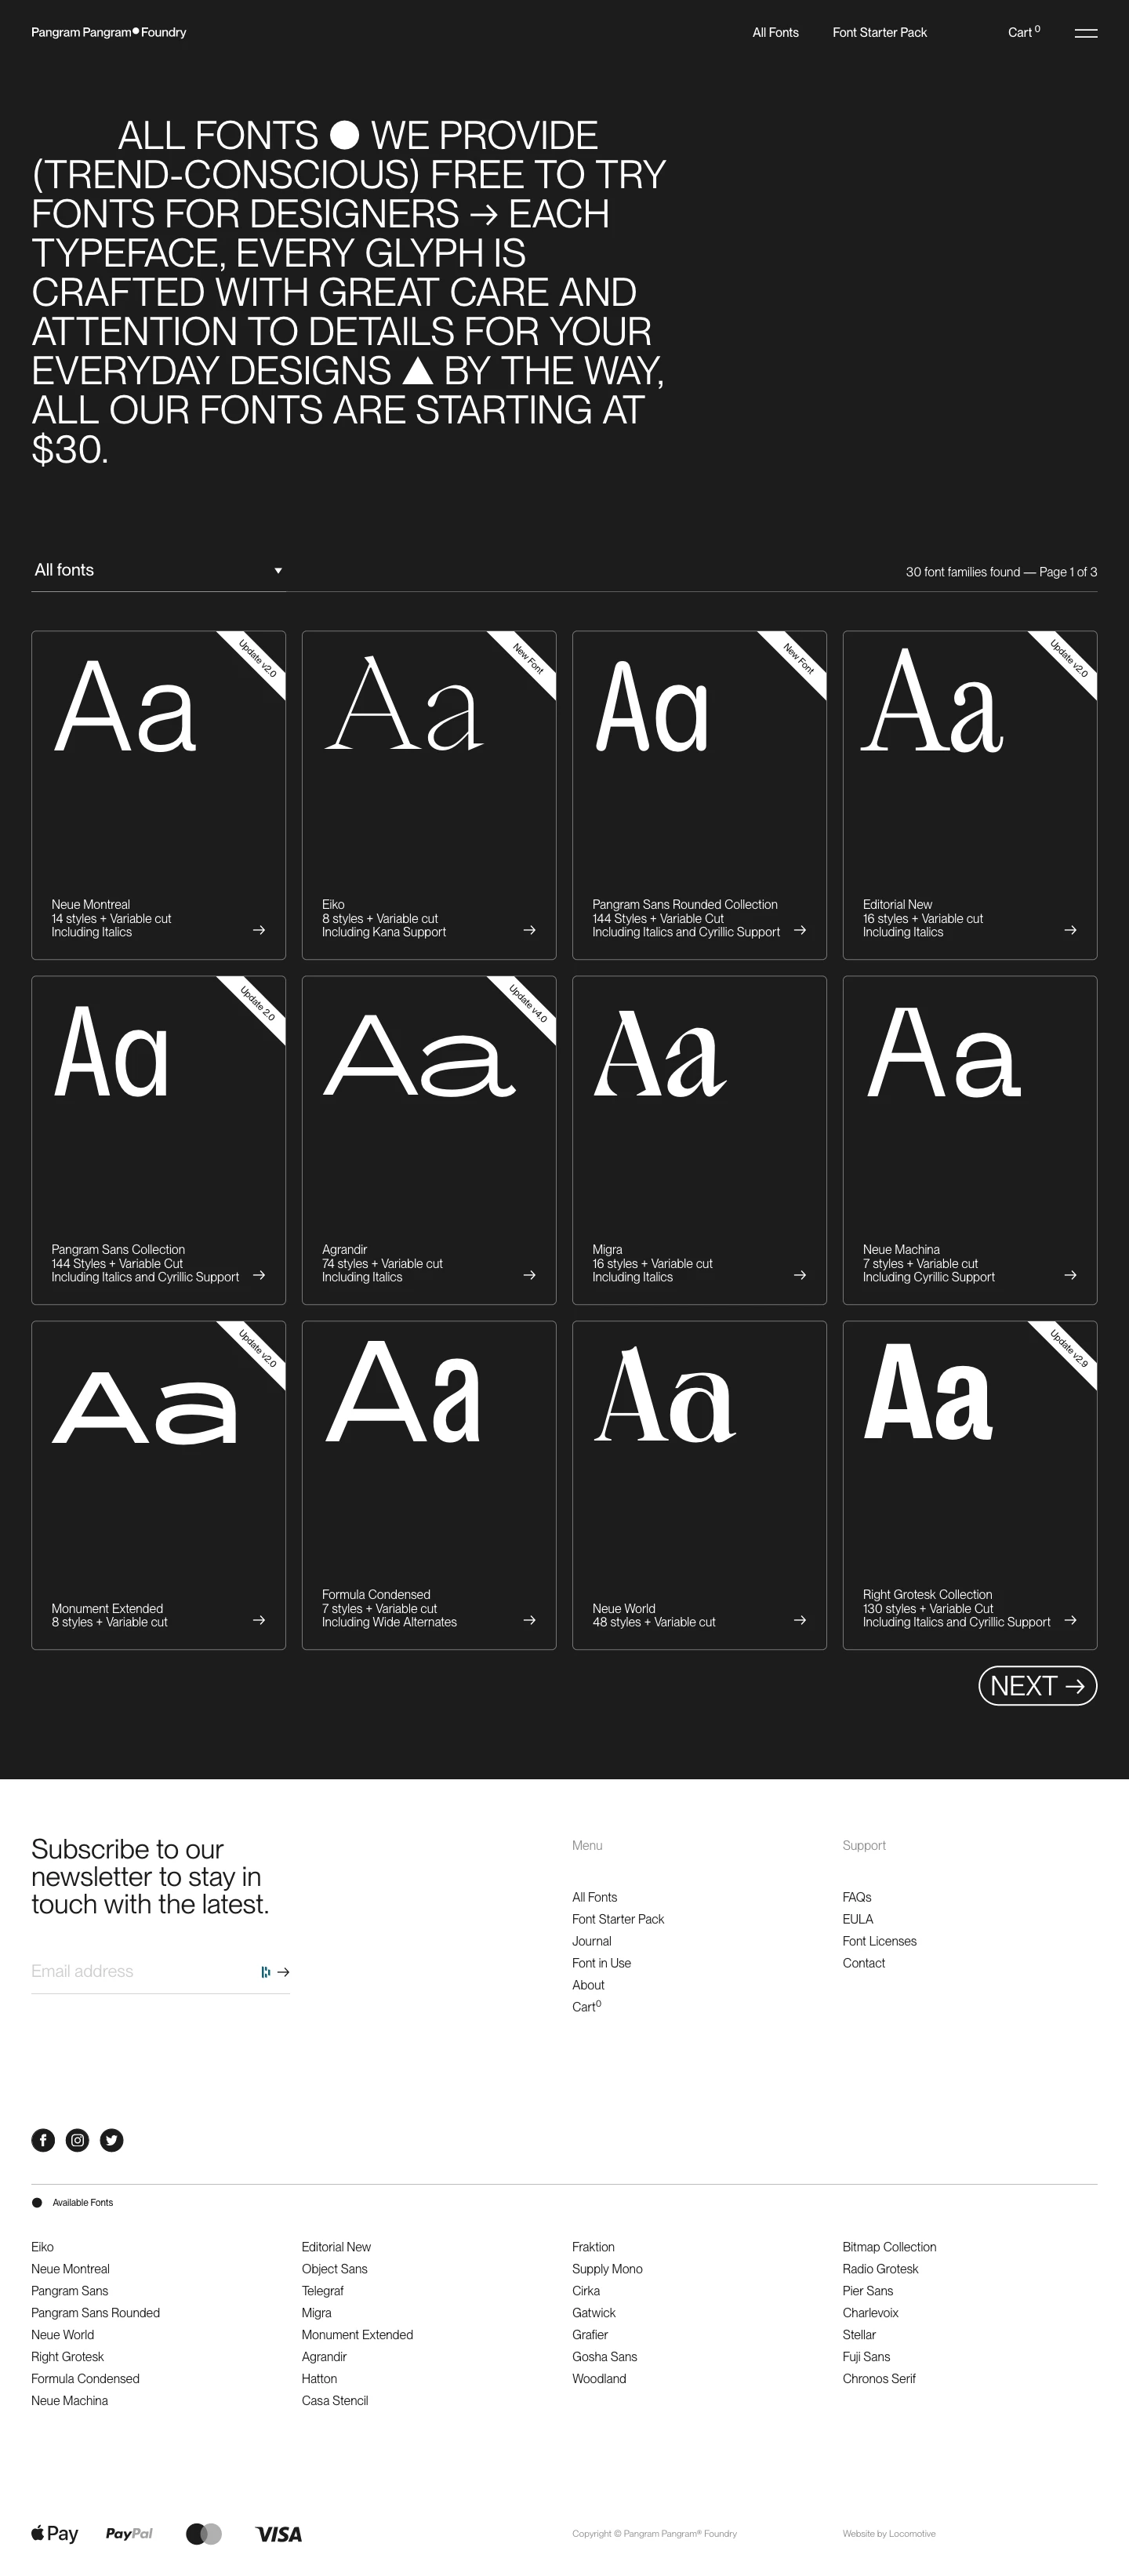 Pangram Pangram Foundry Landing Page Example: We are dedicated to making quality typefaces that can be used in everyday designs and projects. All our fonts are free to try.